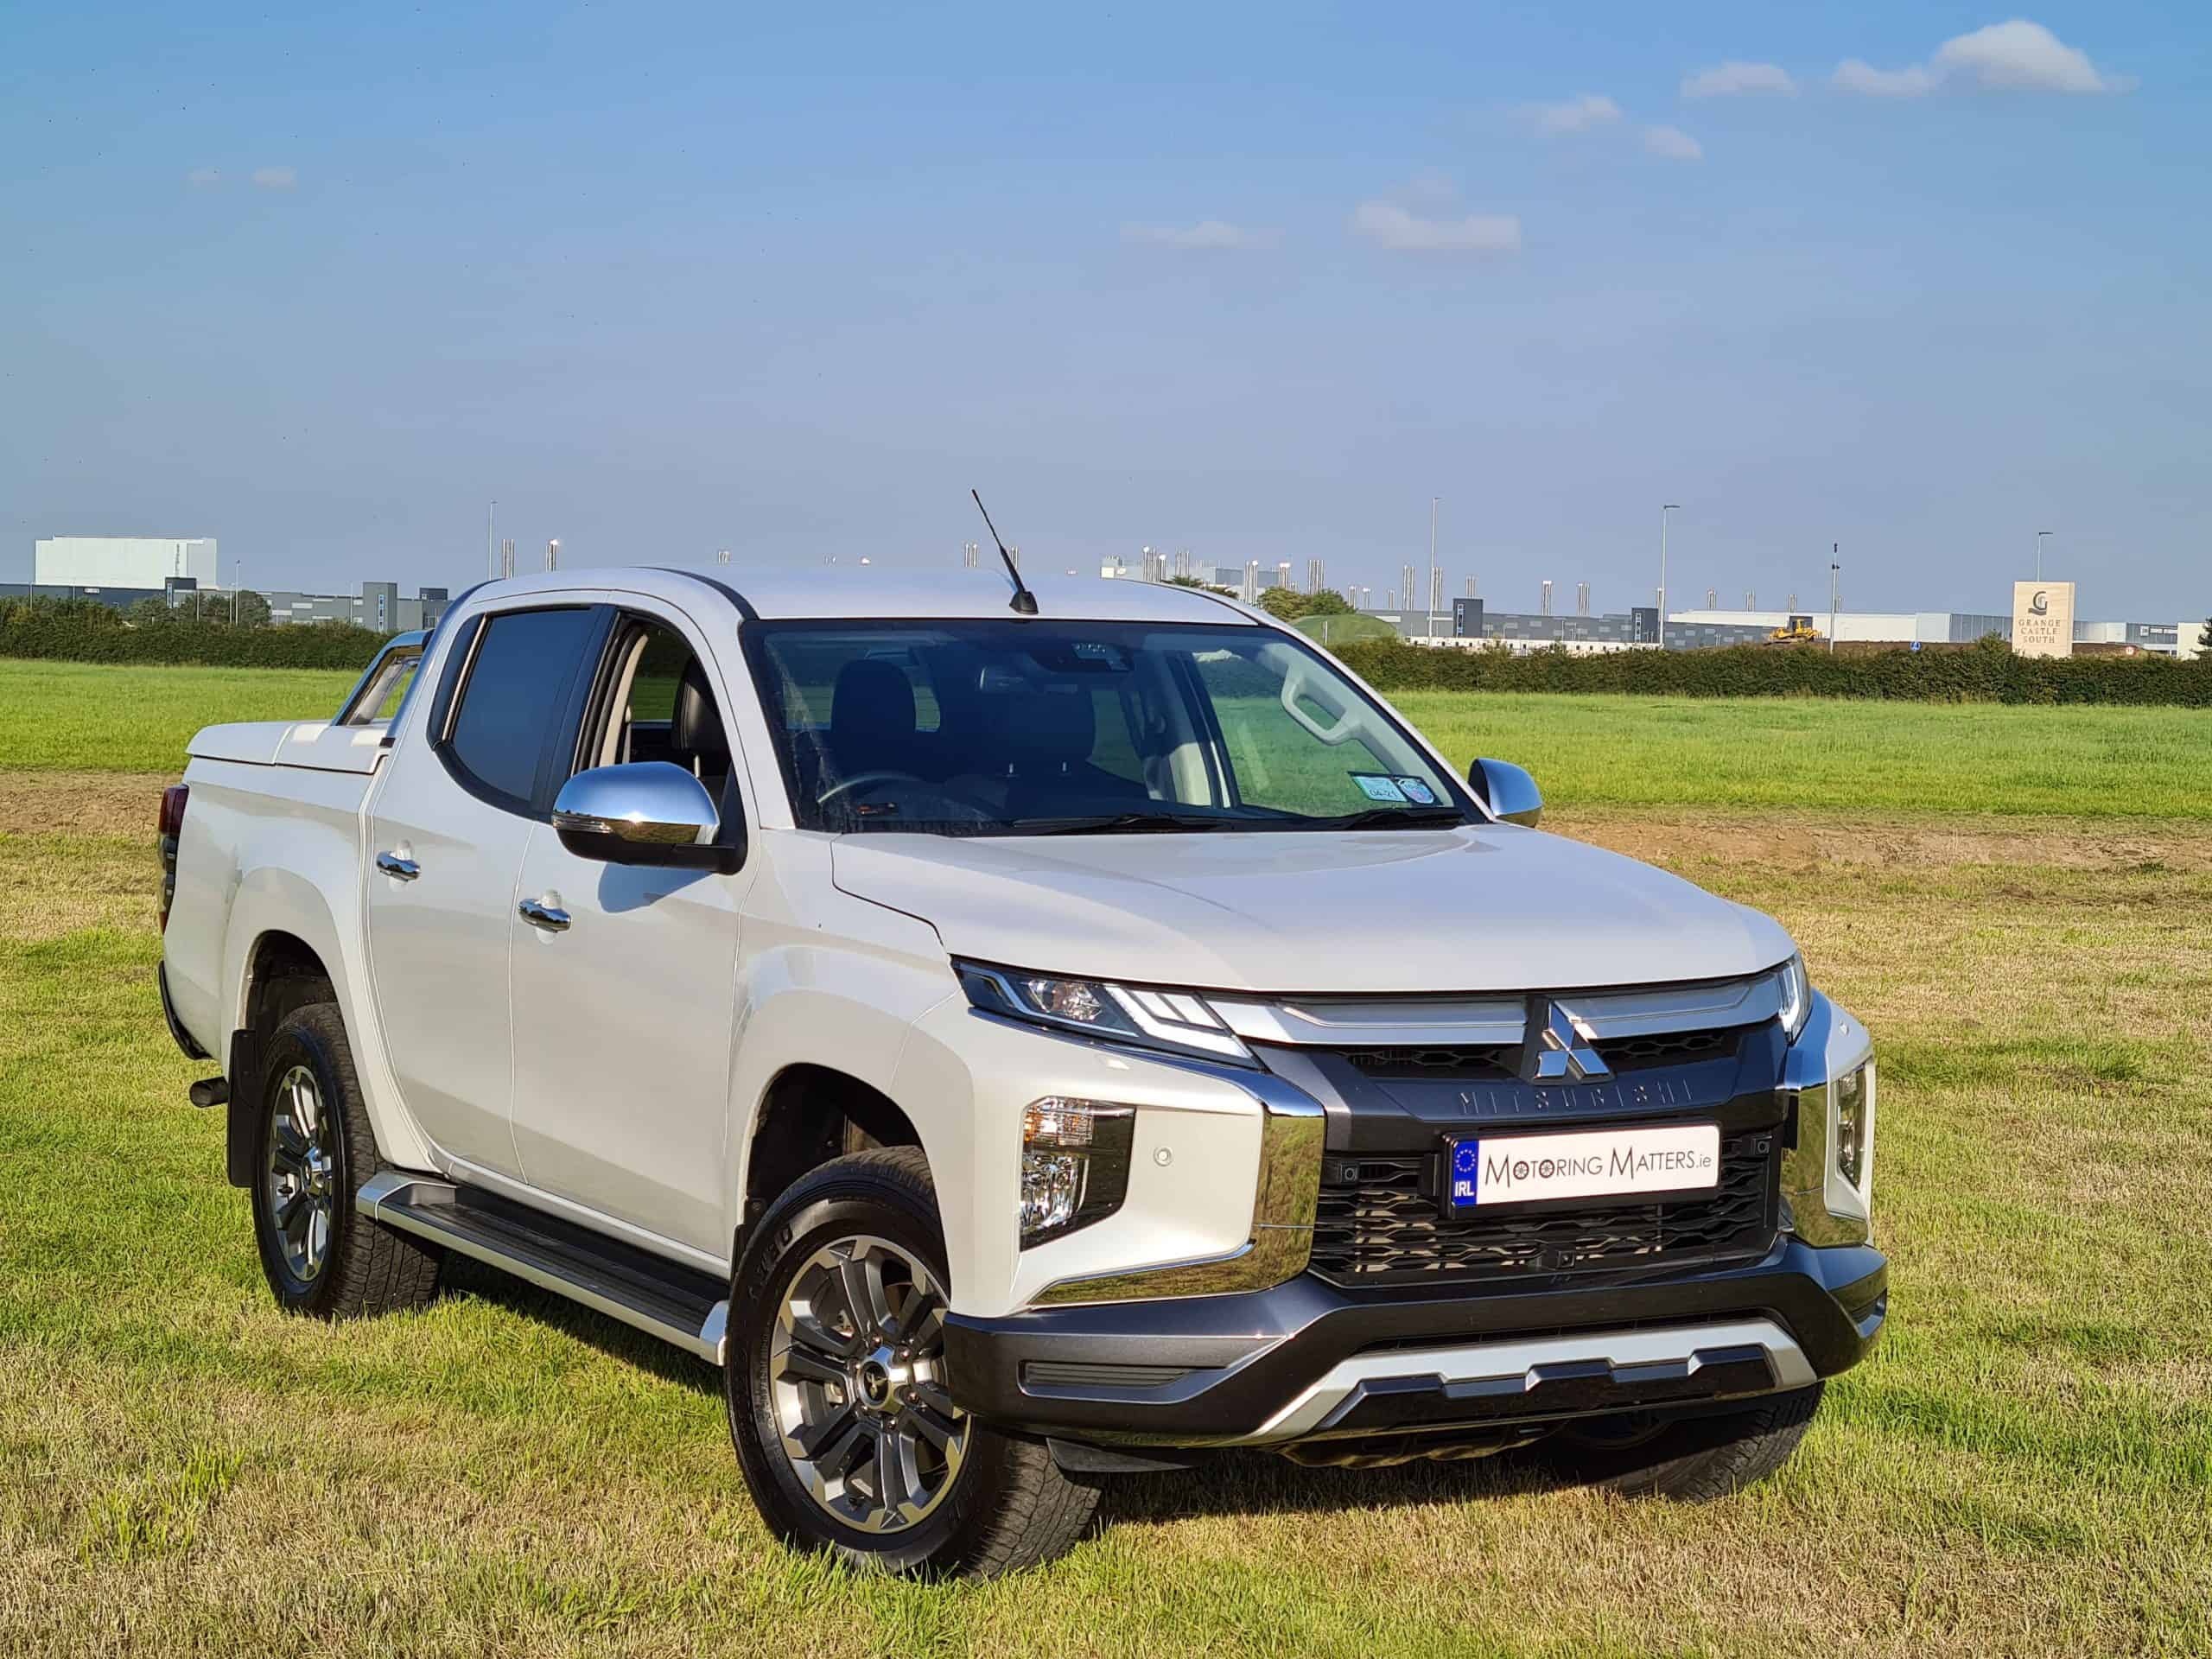 NEW MITSUBISHI L200 DOUBLECAB PICKUP IS CAPABLE